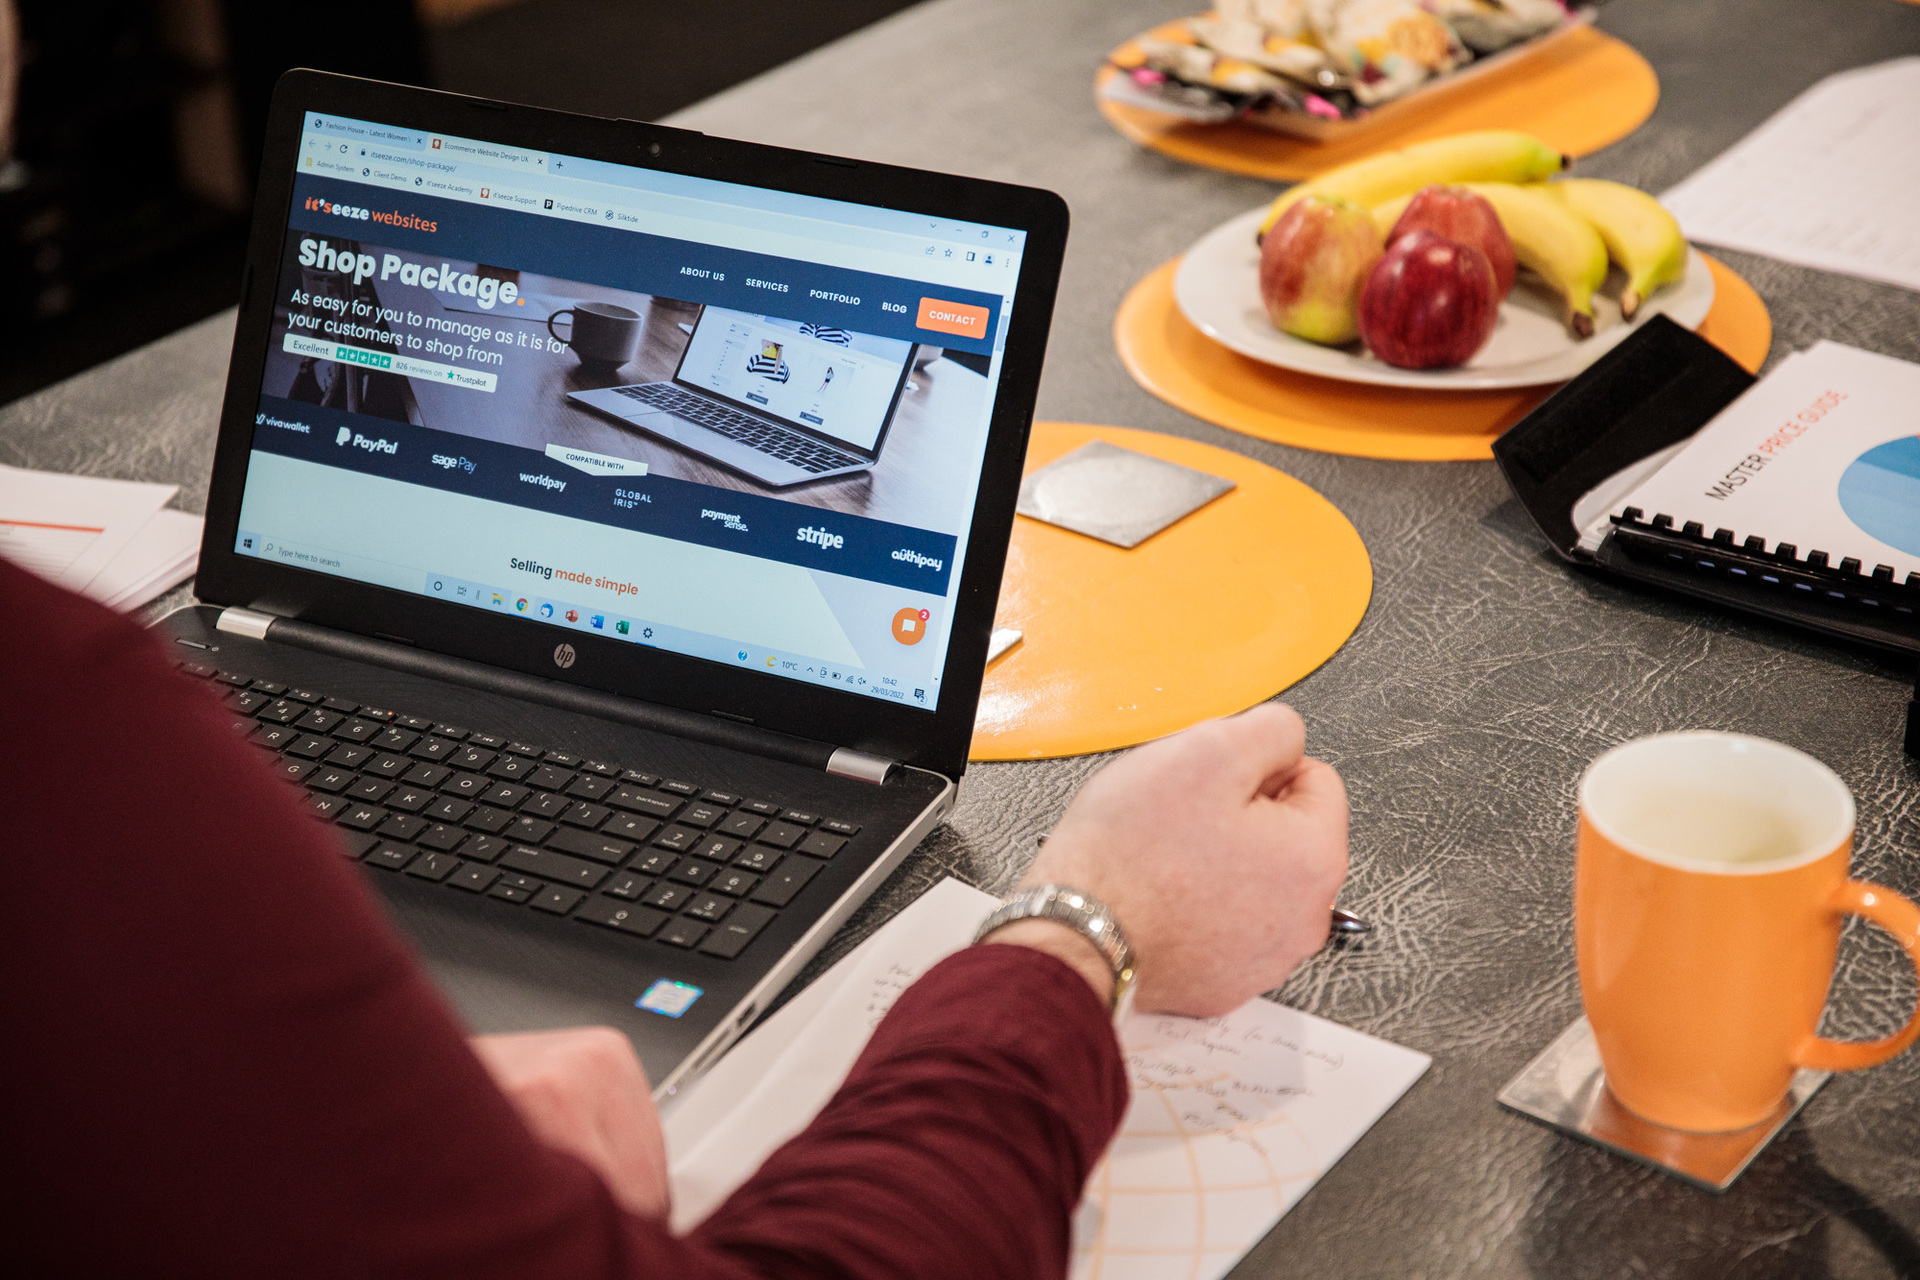 It'seeze web design shown on a laptop with a fruit bowl in the background